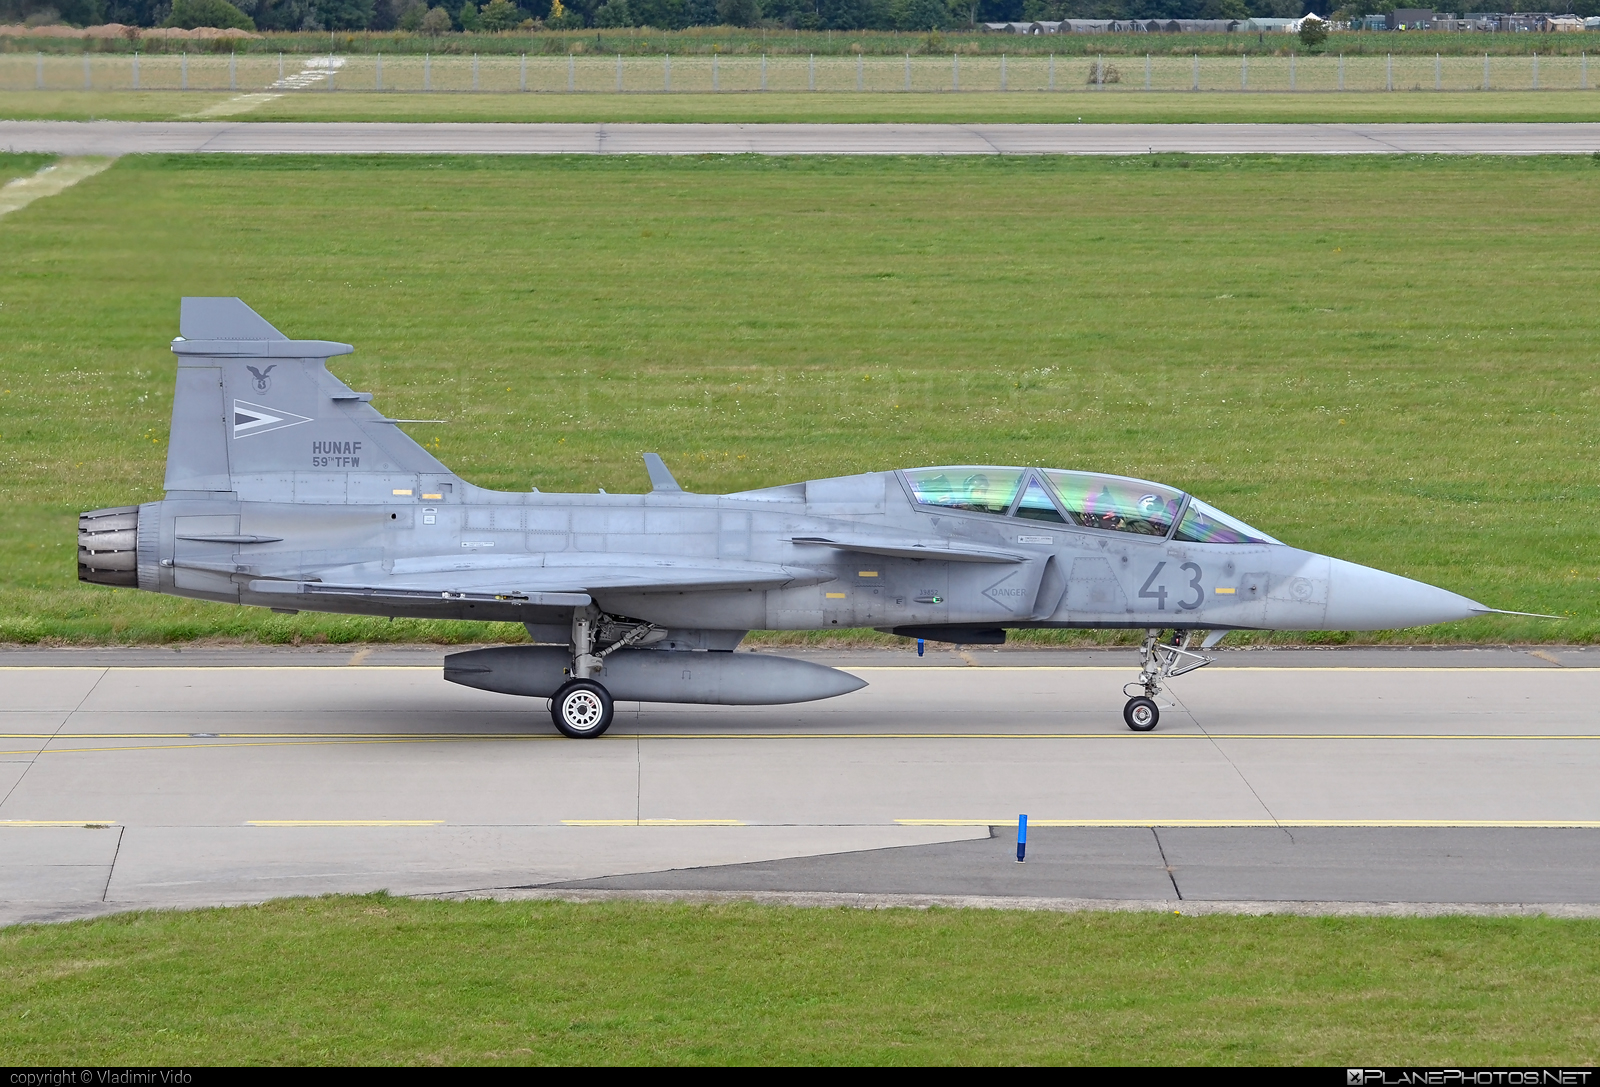 Saab JAS 39D Gripen - 43 operated by Magyar Légierő (Hungarian Air Force) #gripen #hungarianairforce #jas39 #jas39d #jas39gripen #magyarlegiero #saab